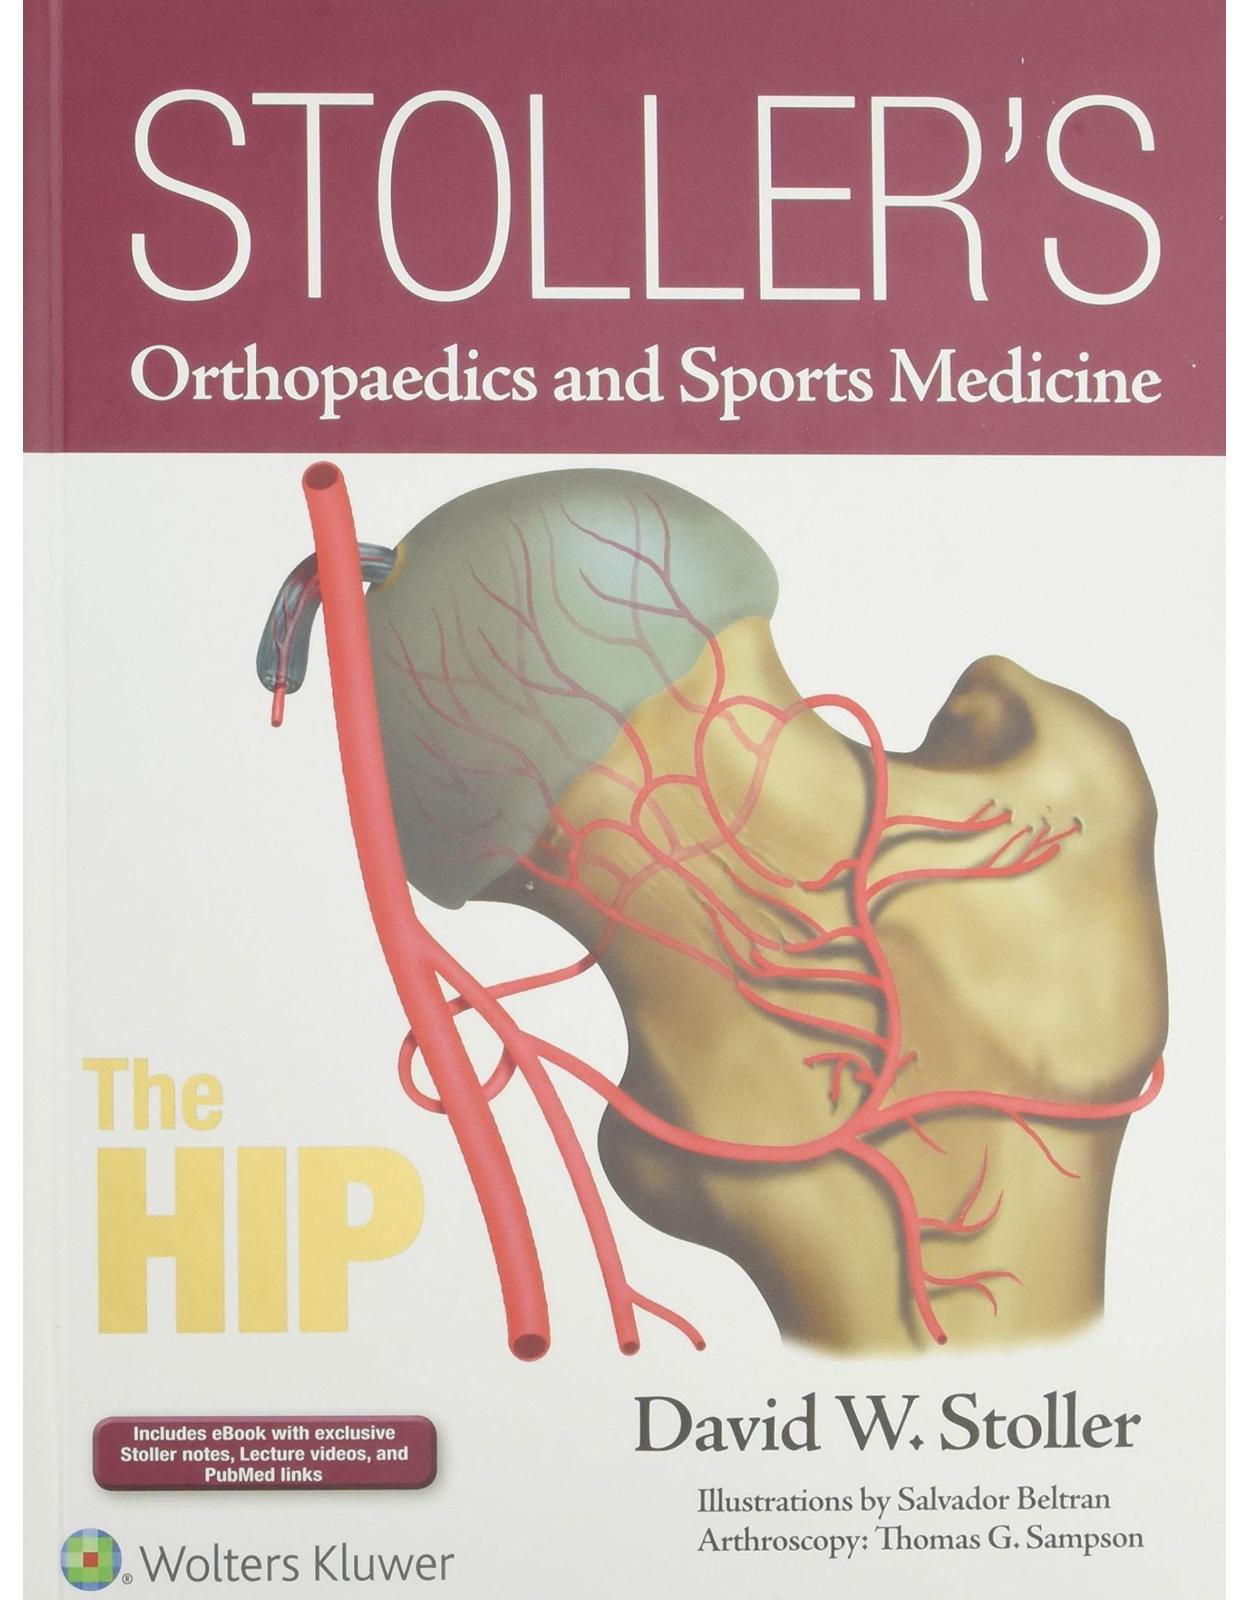 Stoller’s Orthopaedics and Sports Medicine: The Hip (Stollers Orthopaedics & Sports)